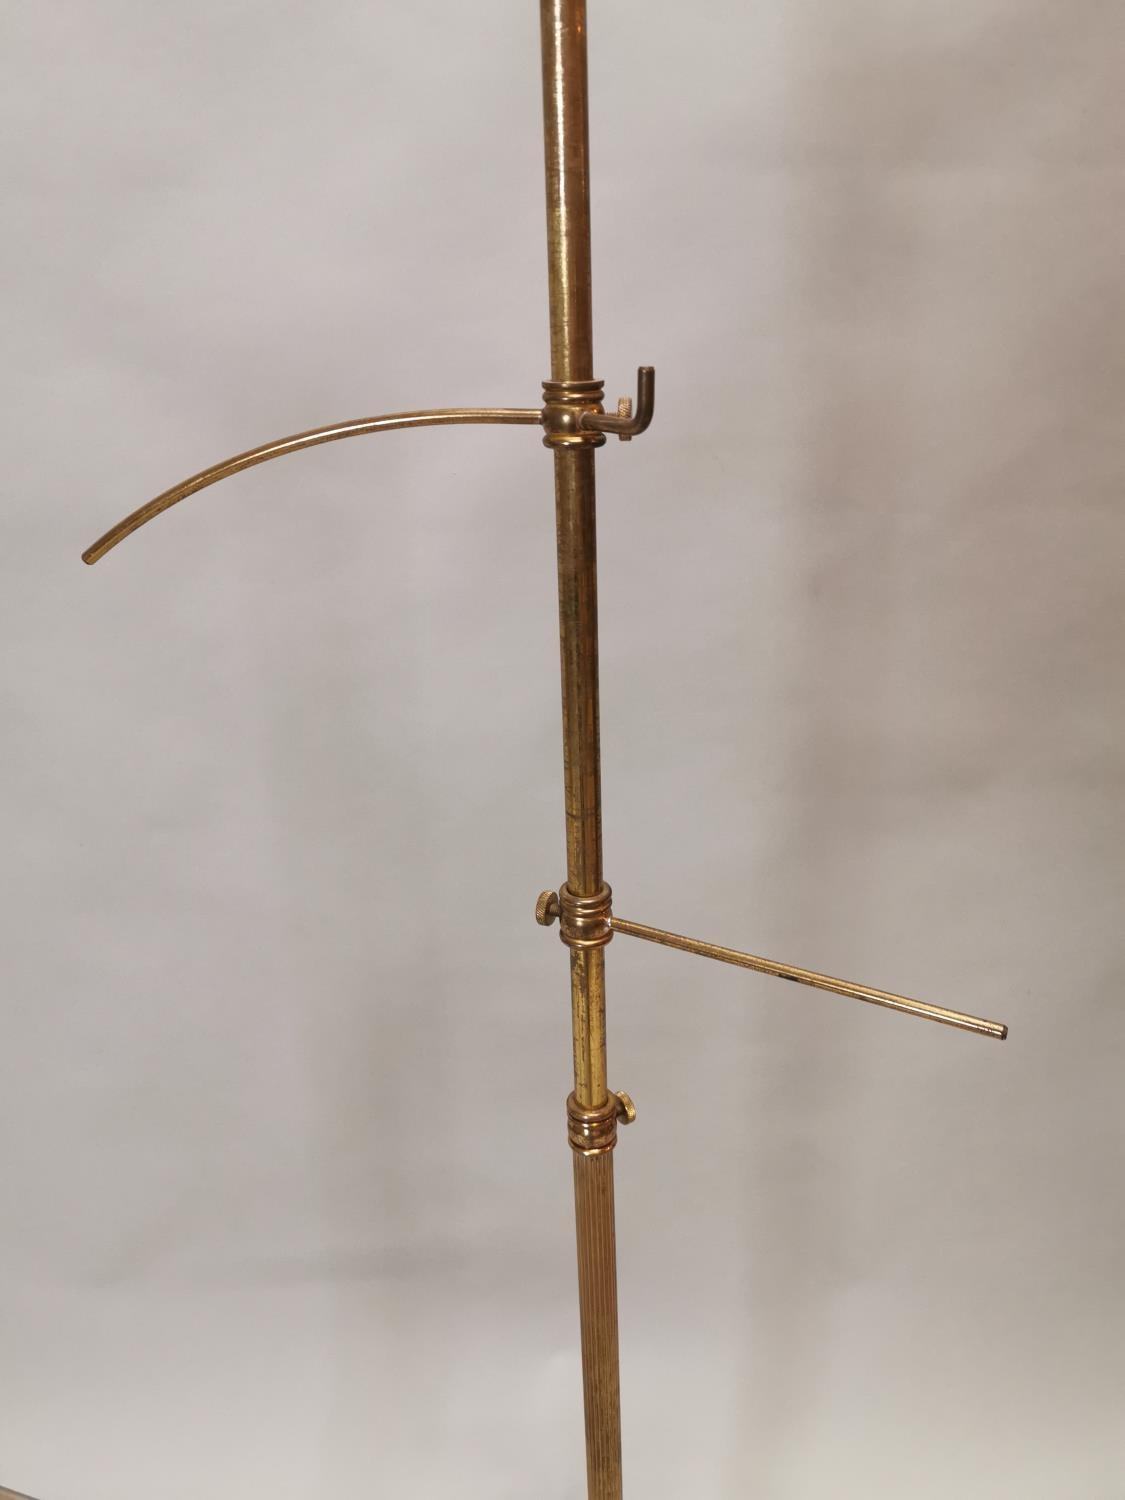 Two early 20th C. brass haberdashery shop hat stands - Image 4 of 8